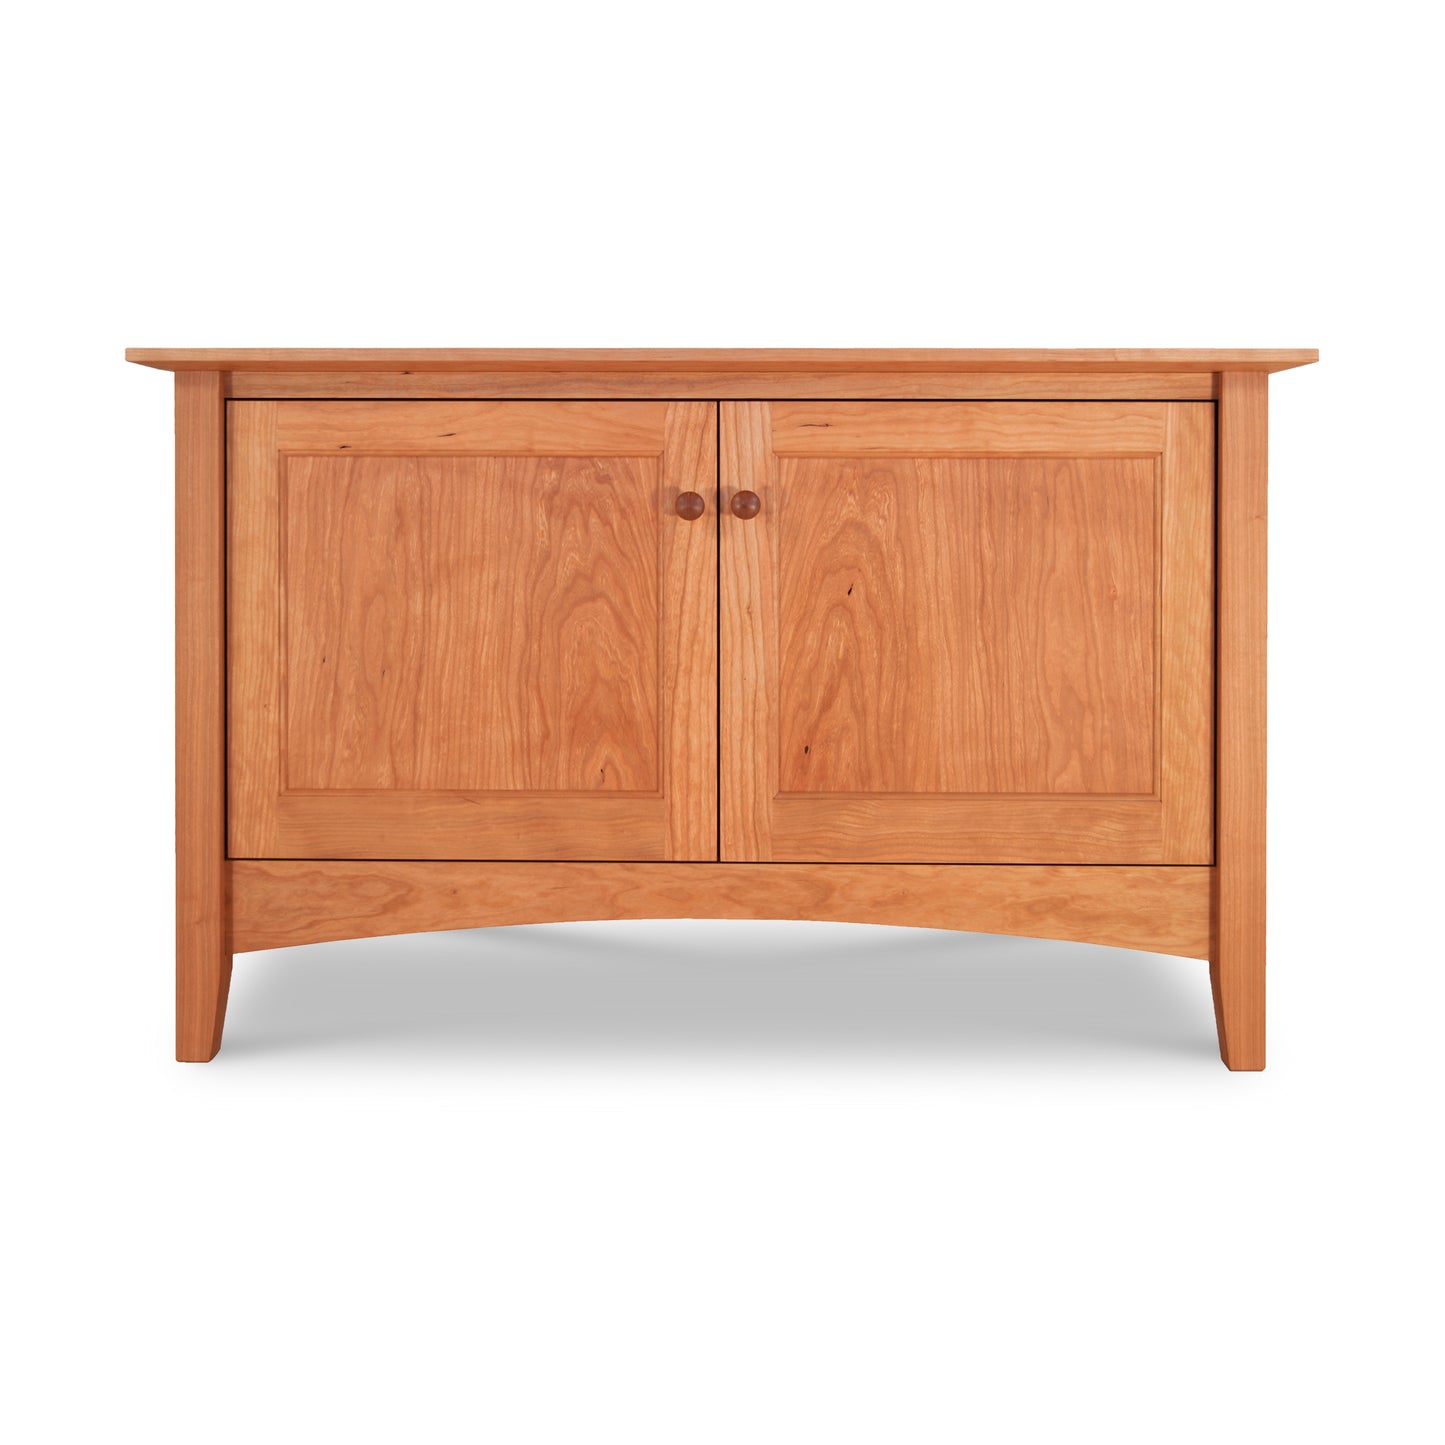 A Maple Corner Woodworks American Shaker 48" TV Stand with two doors and a simple, curved base design, isolated on a white background.